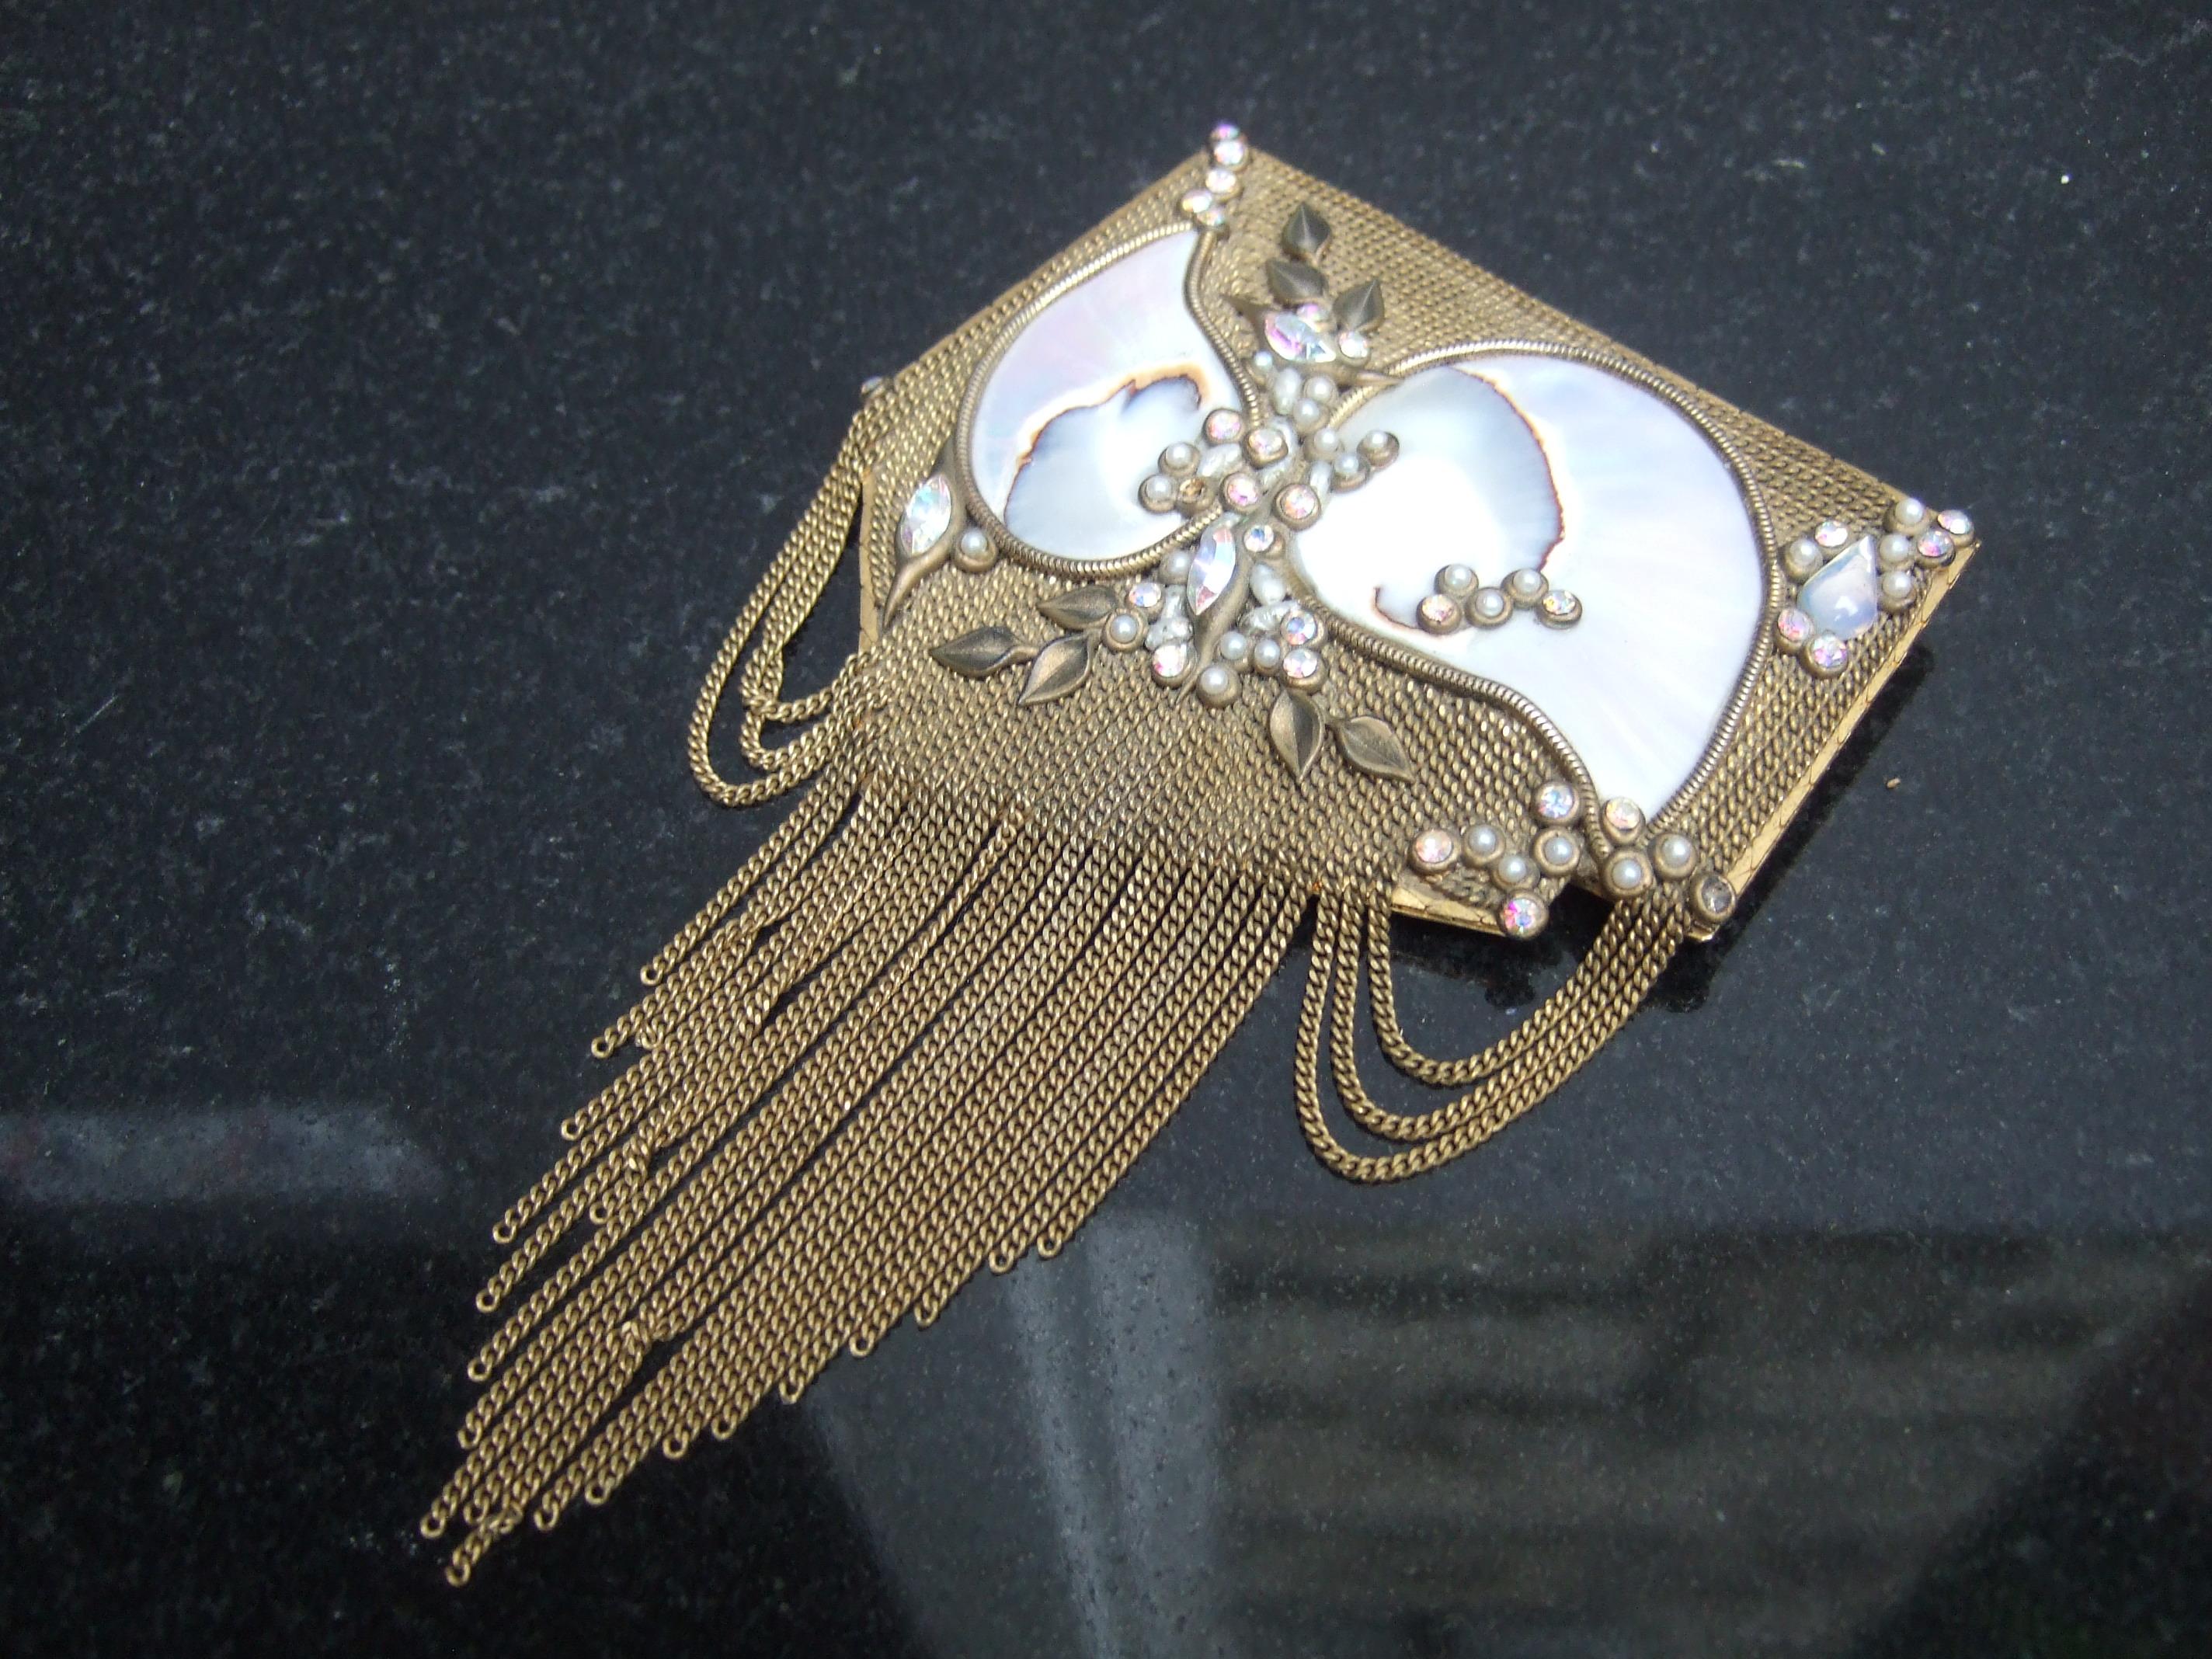  Mother of Pearl Jeweled Artisan Massive Gilt Metal Tassel Brooch c 1970s In Good Condition For Sale In University City, MO